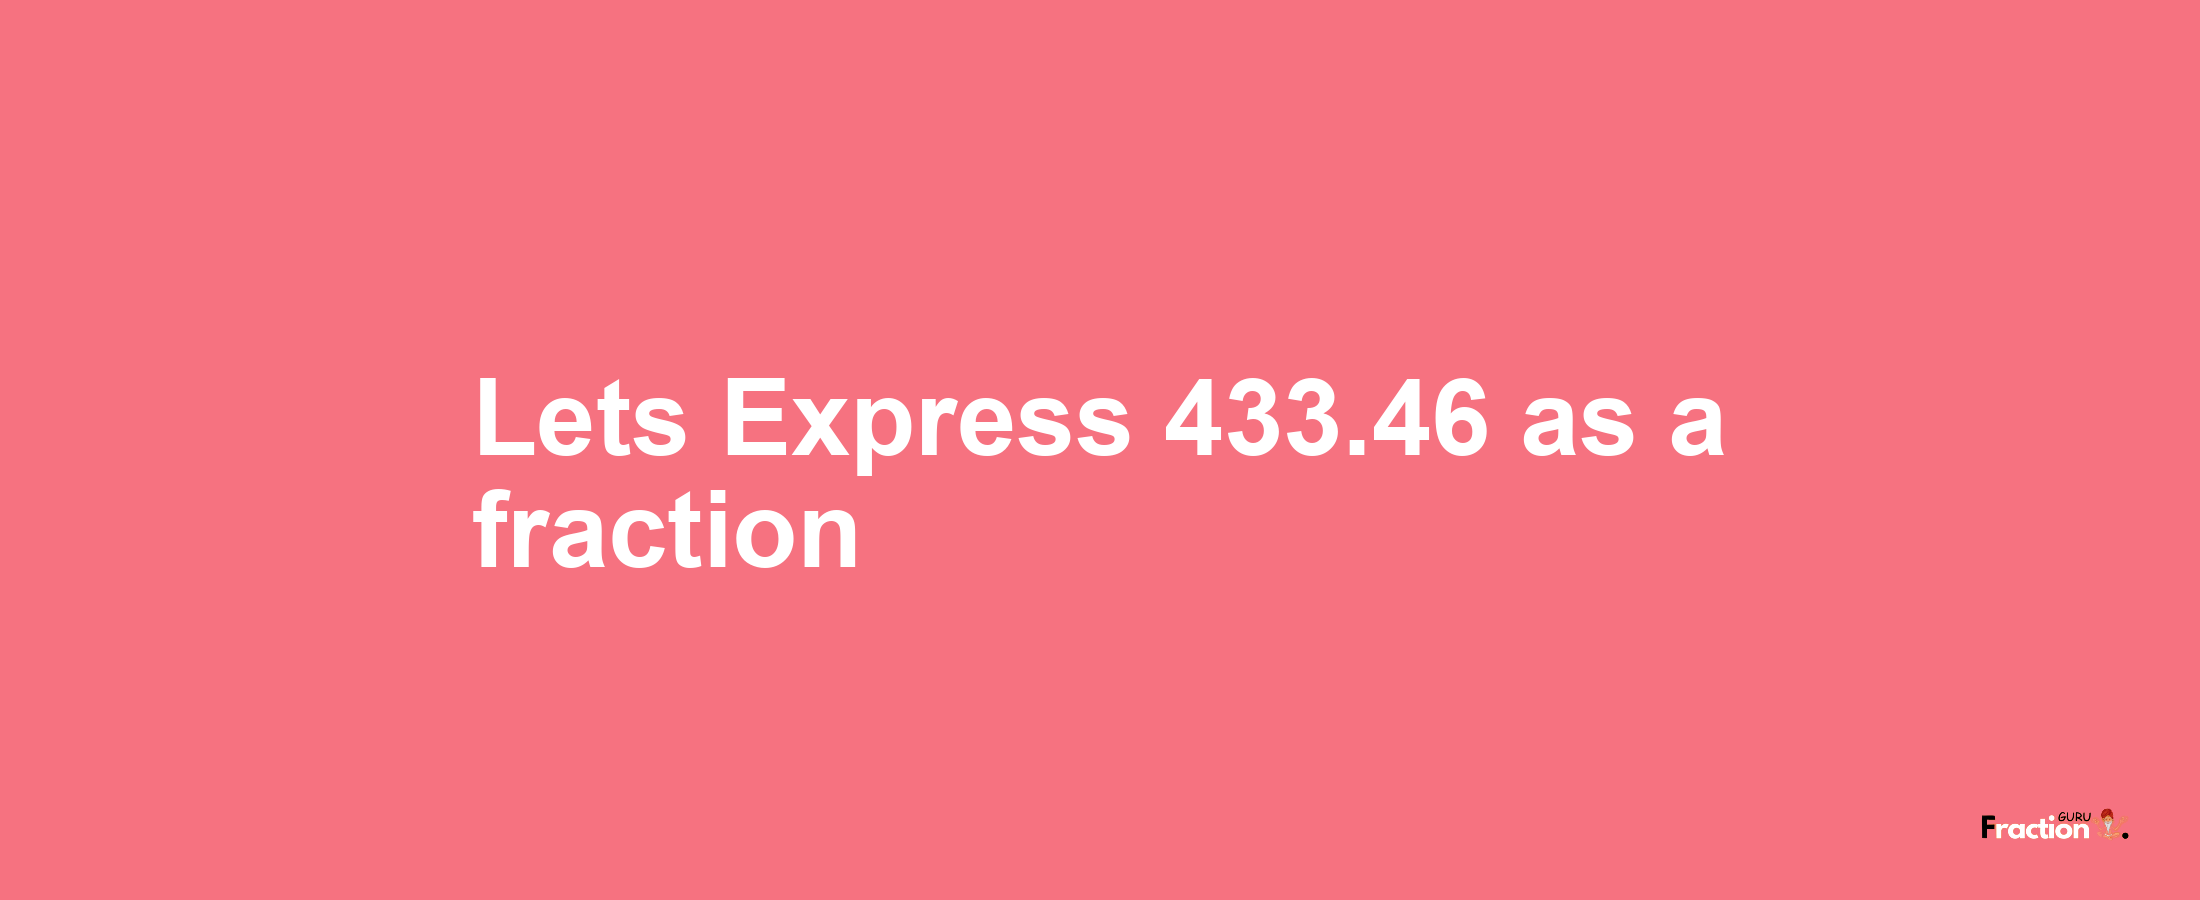 Lets Express 433.46 as afraction